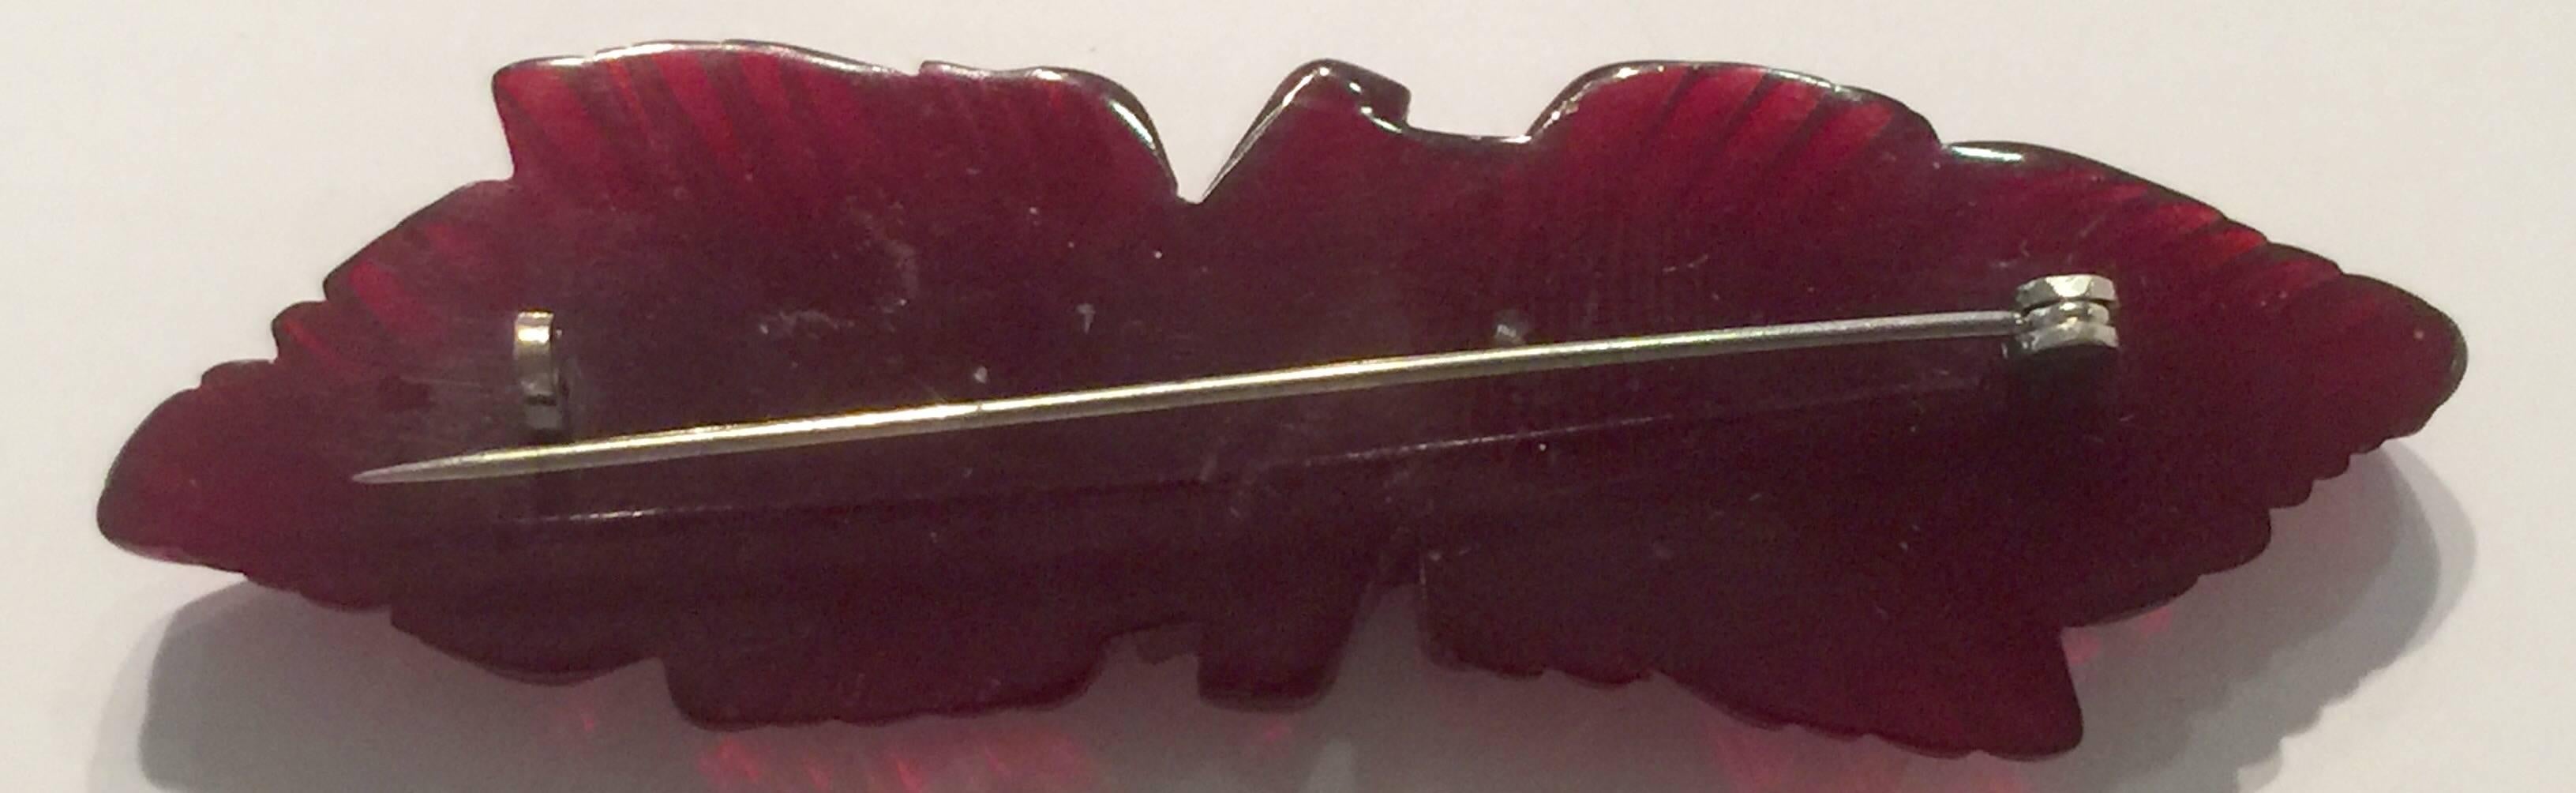 A classic 1930s Translucent  Maroon Bakelite Carved Leaf bar Pin brooch is rich claret color and has edges which reveal great light and translucence. Approximately 2.25